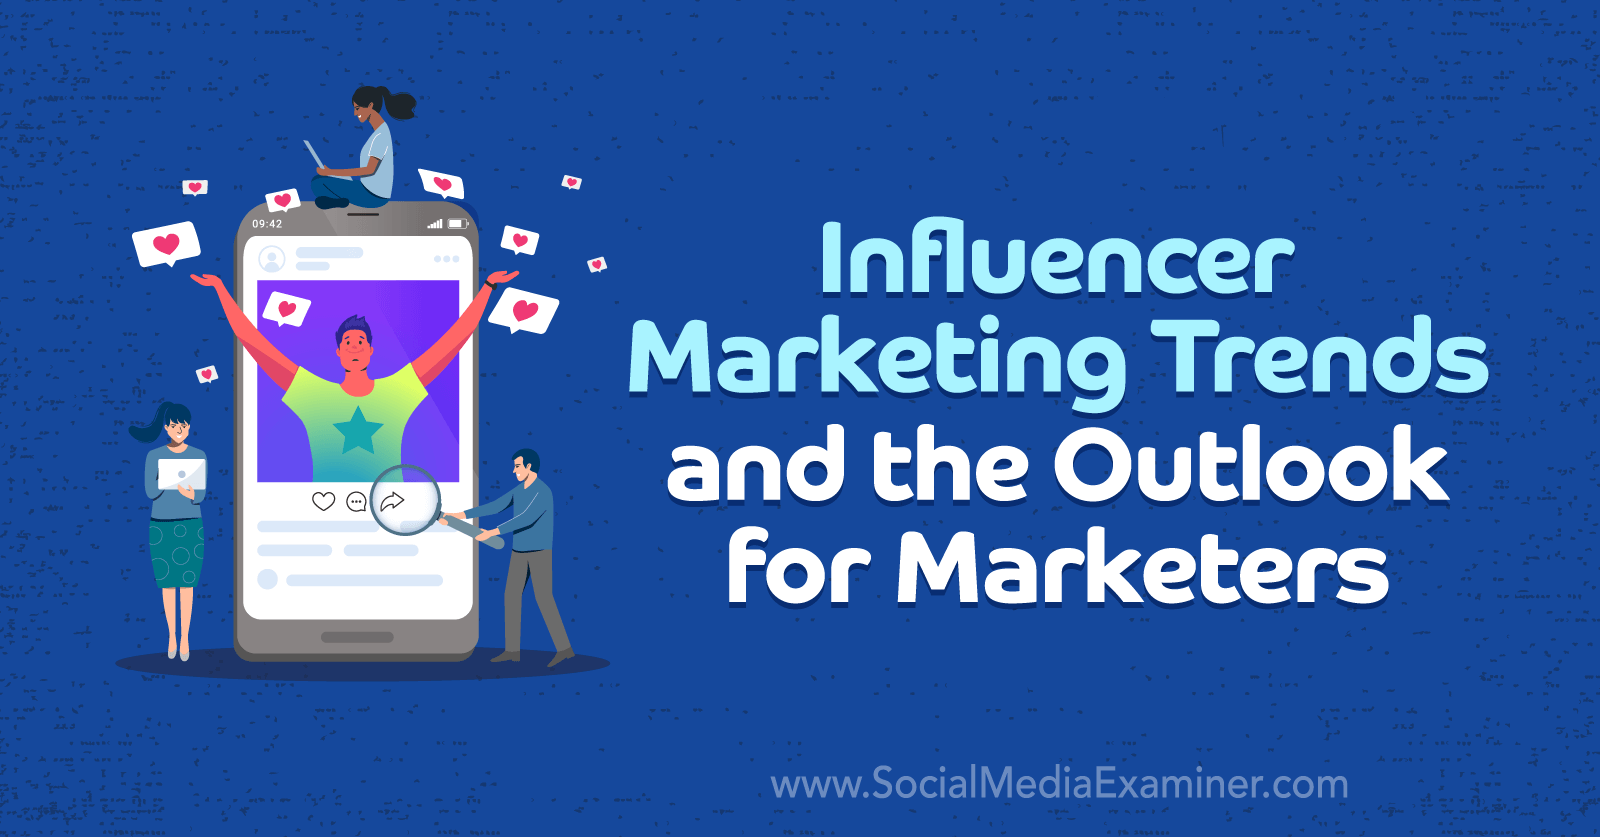 Influencer Marketing Trends and the Outlook for Marketers by Michael Stelzner